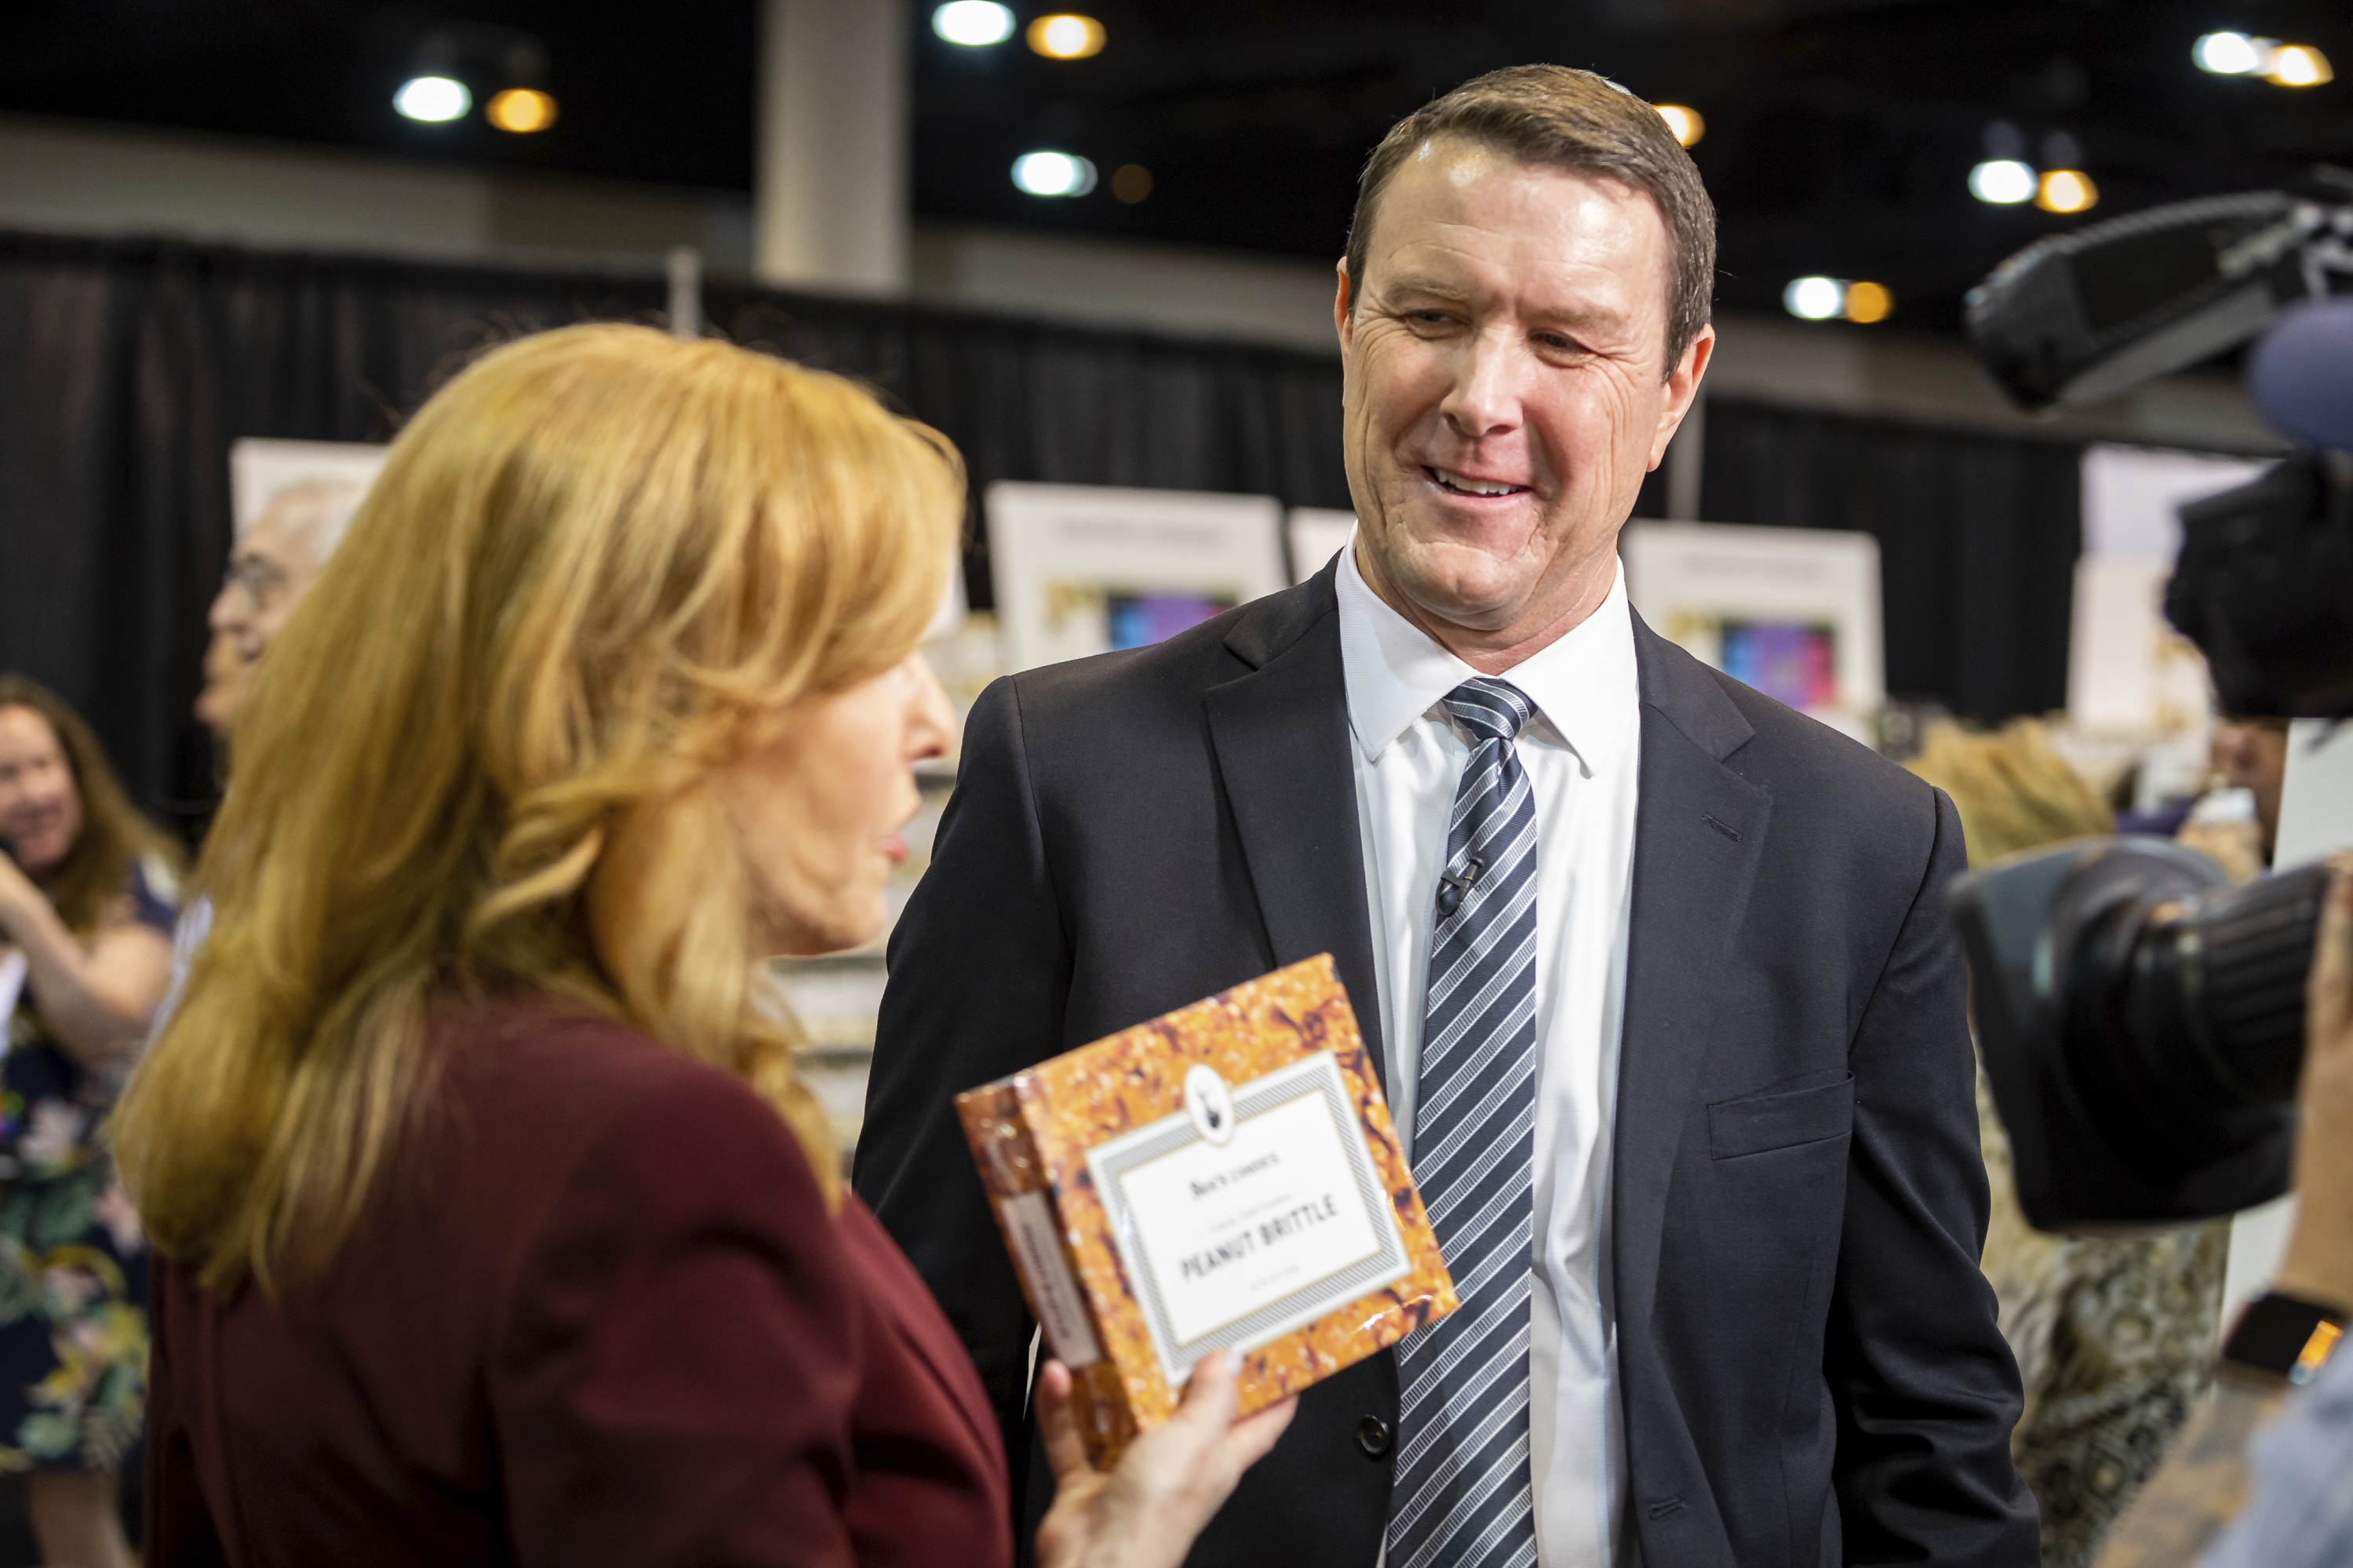 See's Candies President and CEO Pat Egan, speaks to Fox Business reporter Liz Claman about Warren Buffett's favorite See's product, Peanut Brittle, during the Berkshire Hathaway shareholders meeting, on Friday, April 29.